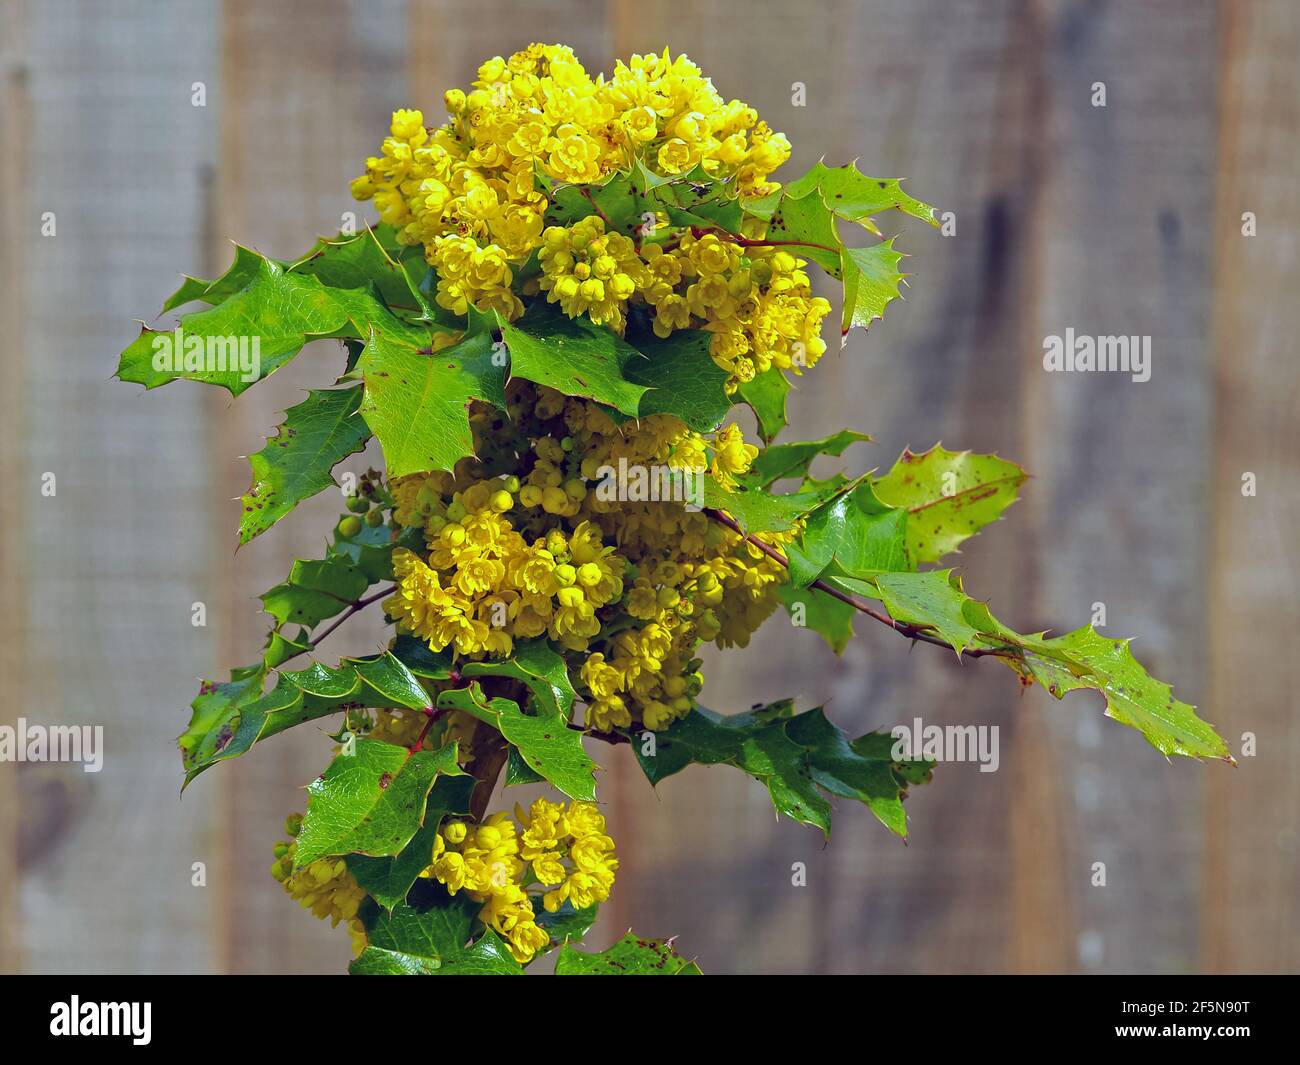 Yellow flowers and green leaves on a holly bush Stock Photo